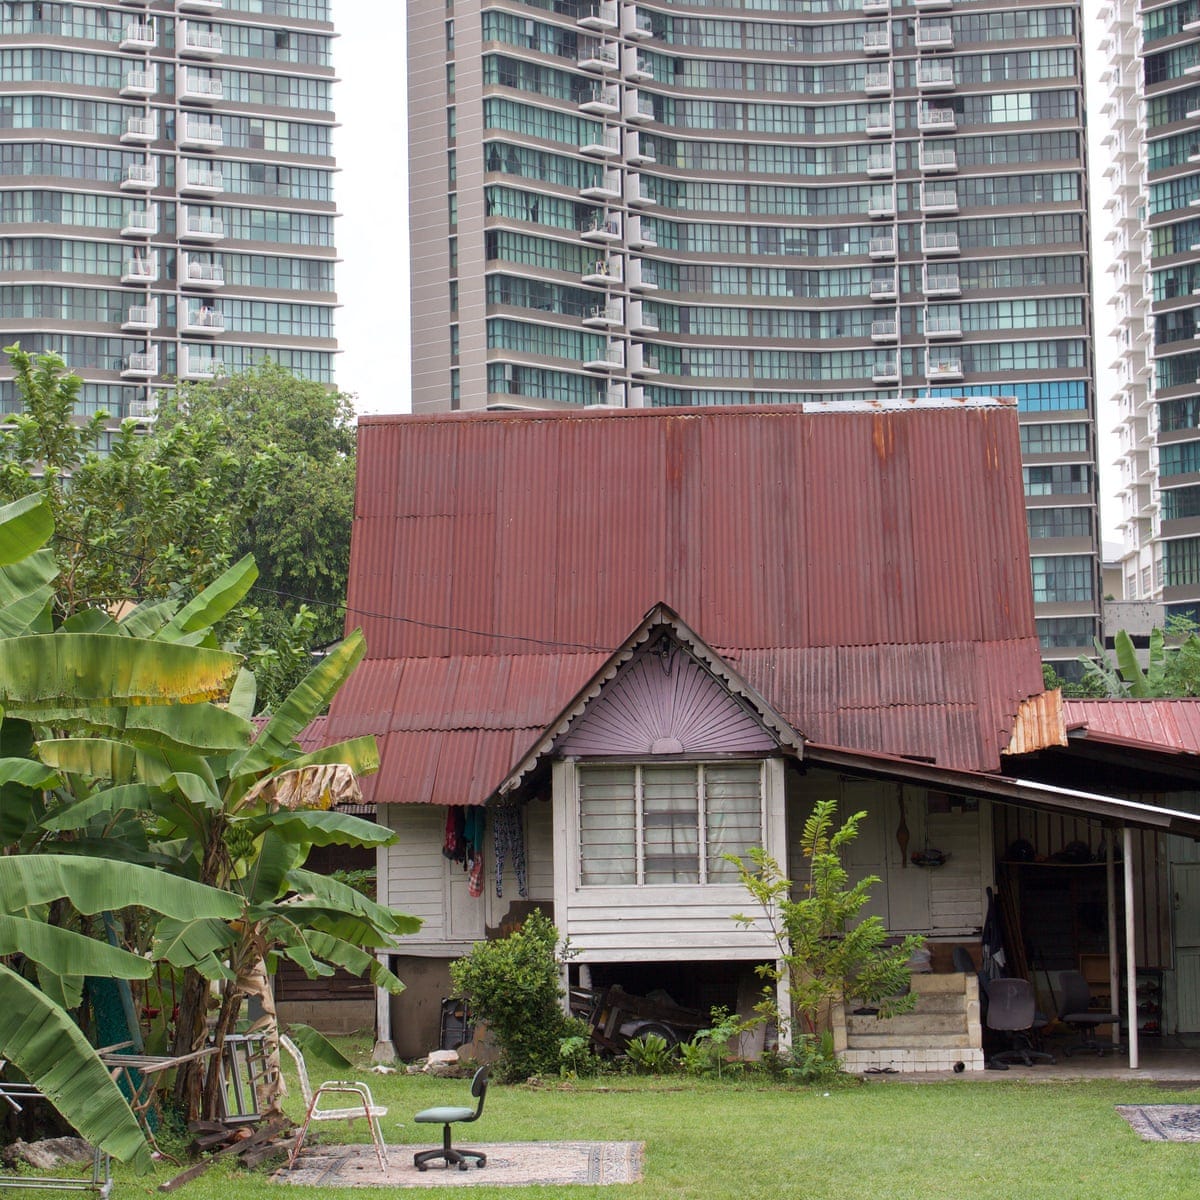 A village amid skyscrapers: how long can Kuala Lumpur's enclave hold out? |  Cities | The Guardian